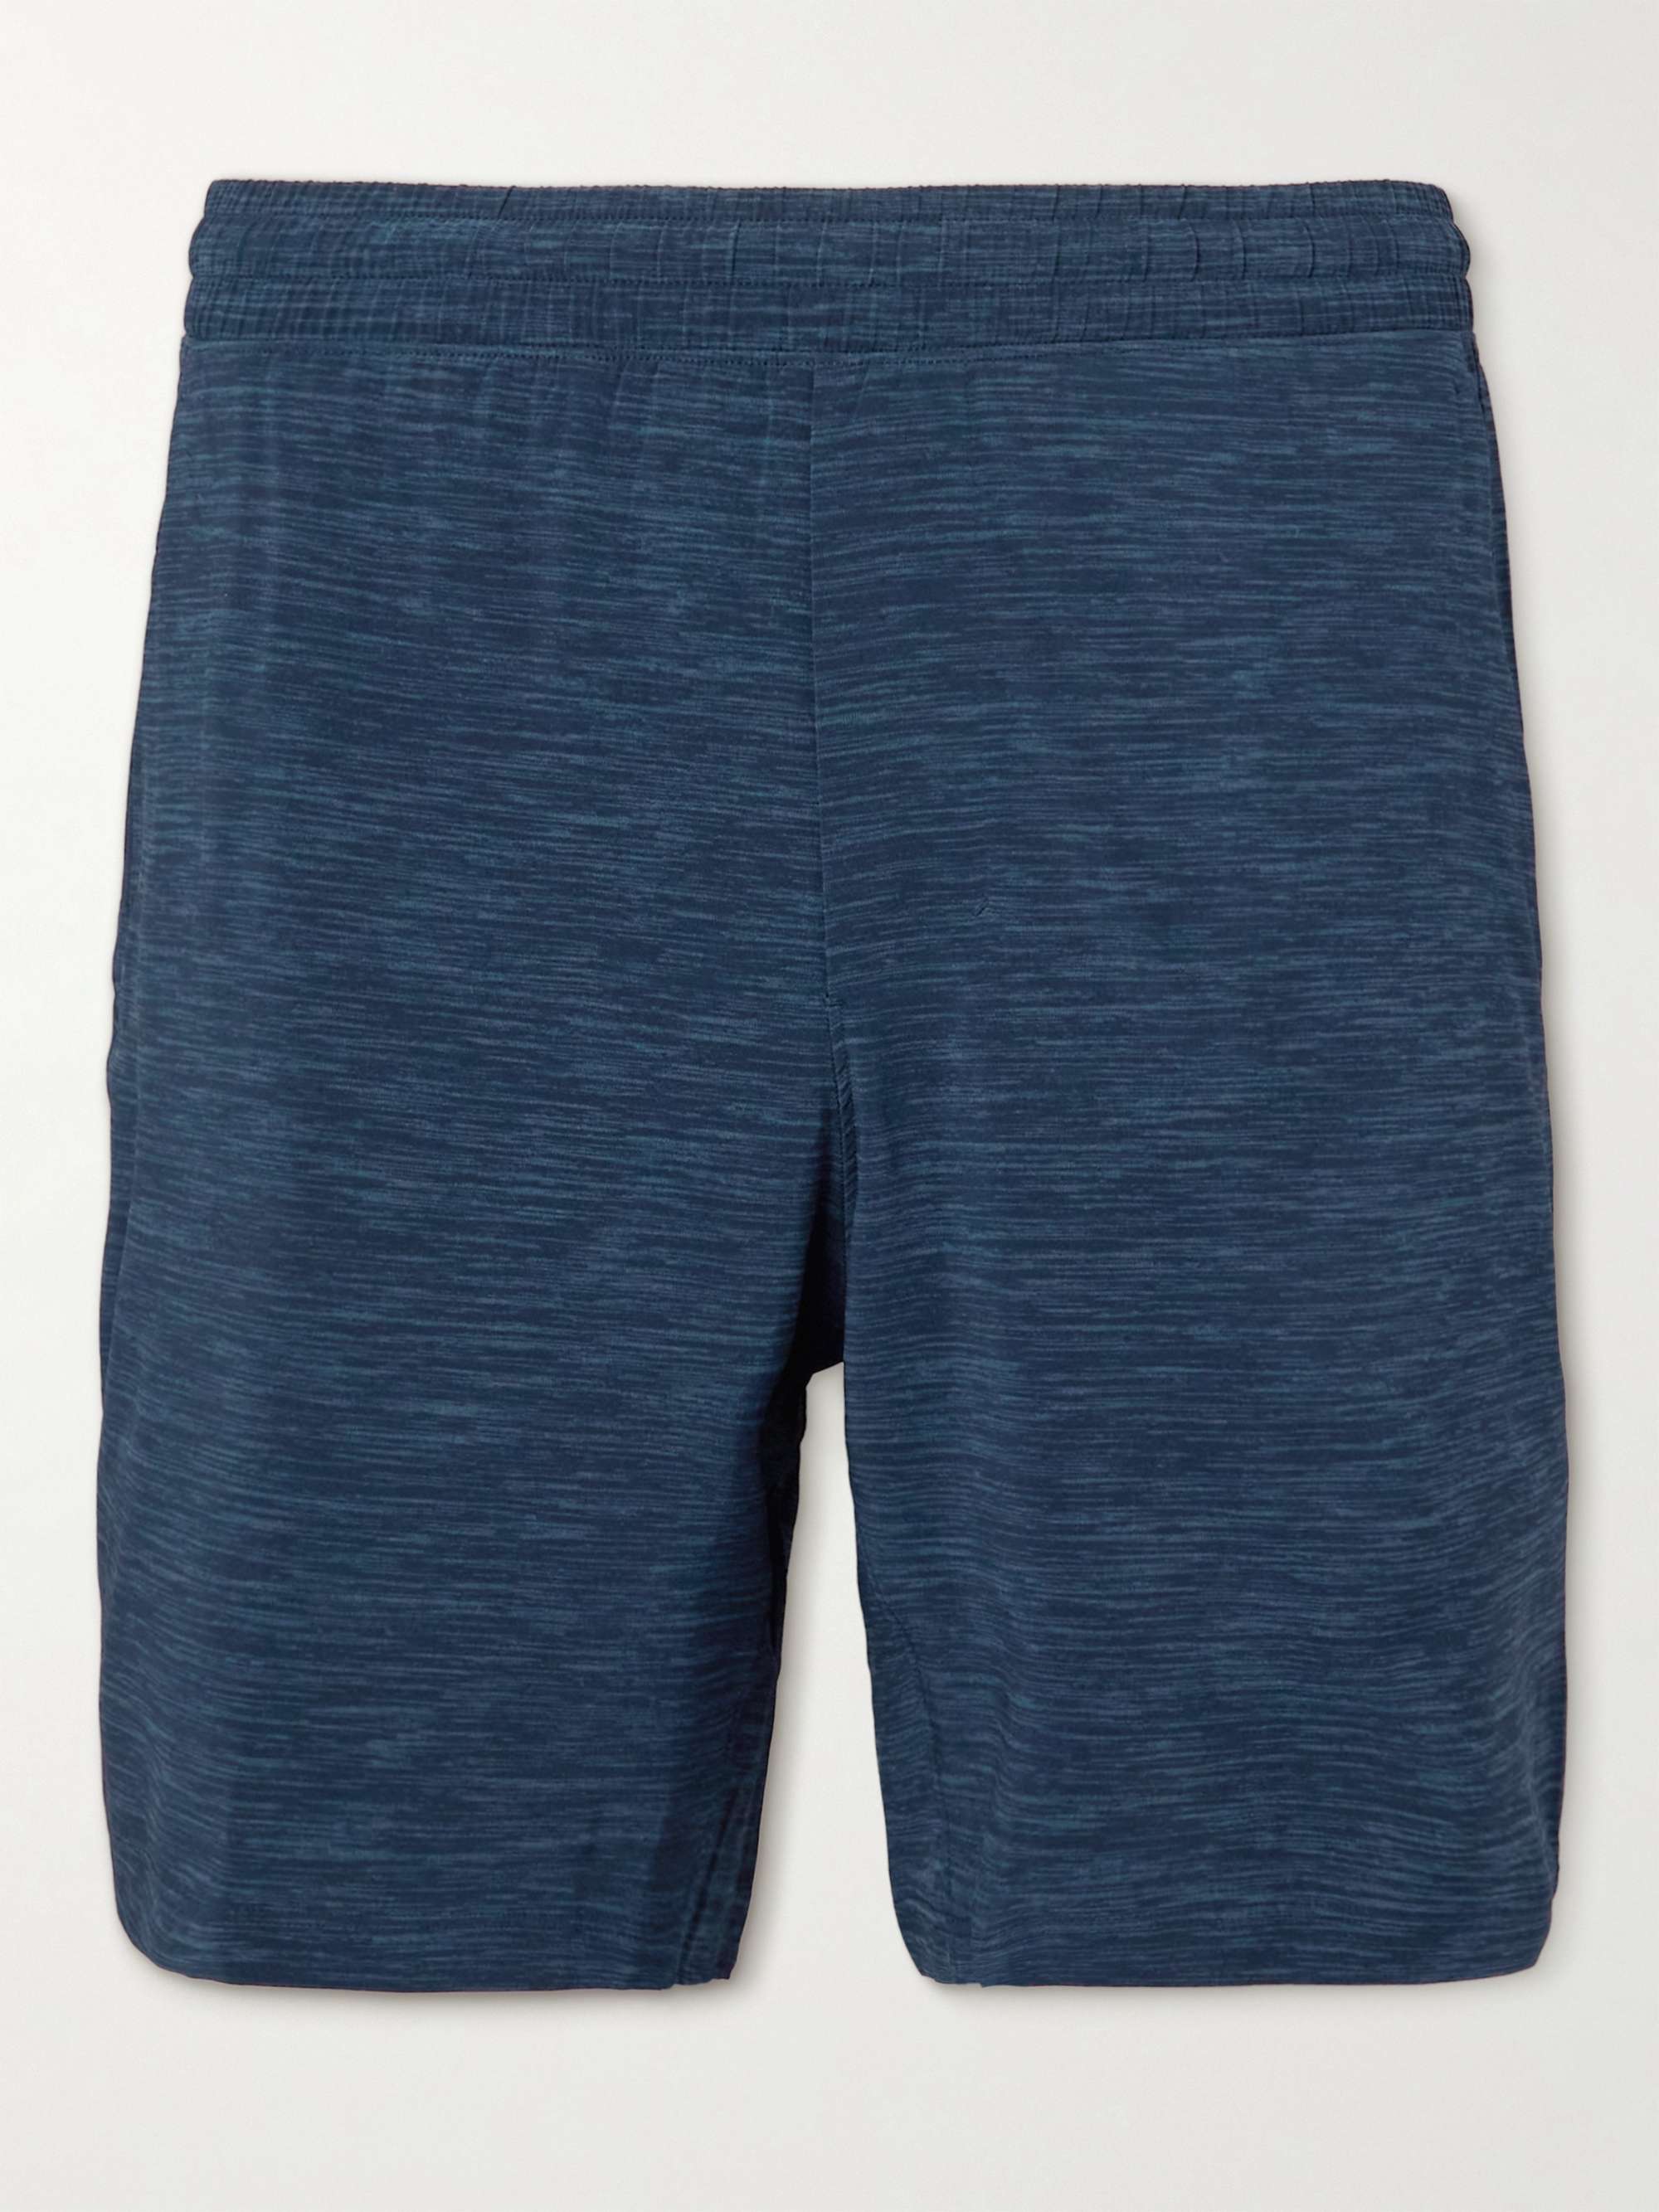 LULULEMON Pace Breaker 7" Printed Recycled Swift Shorts